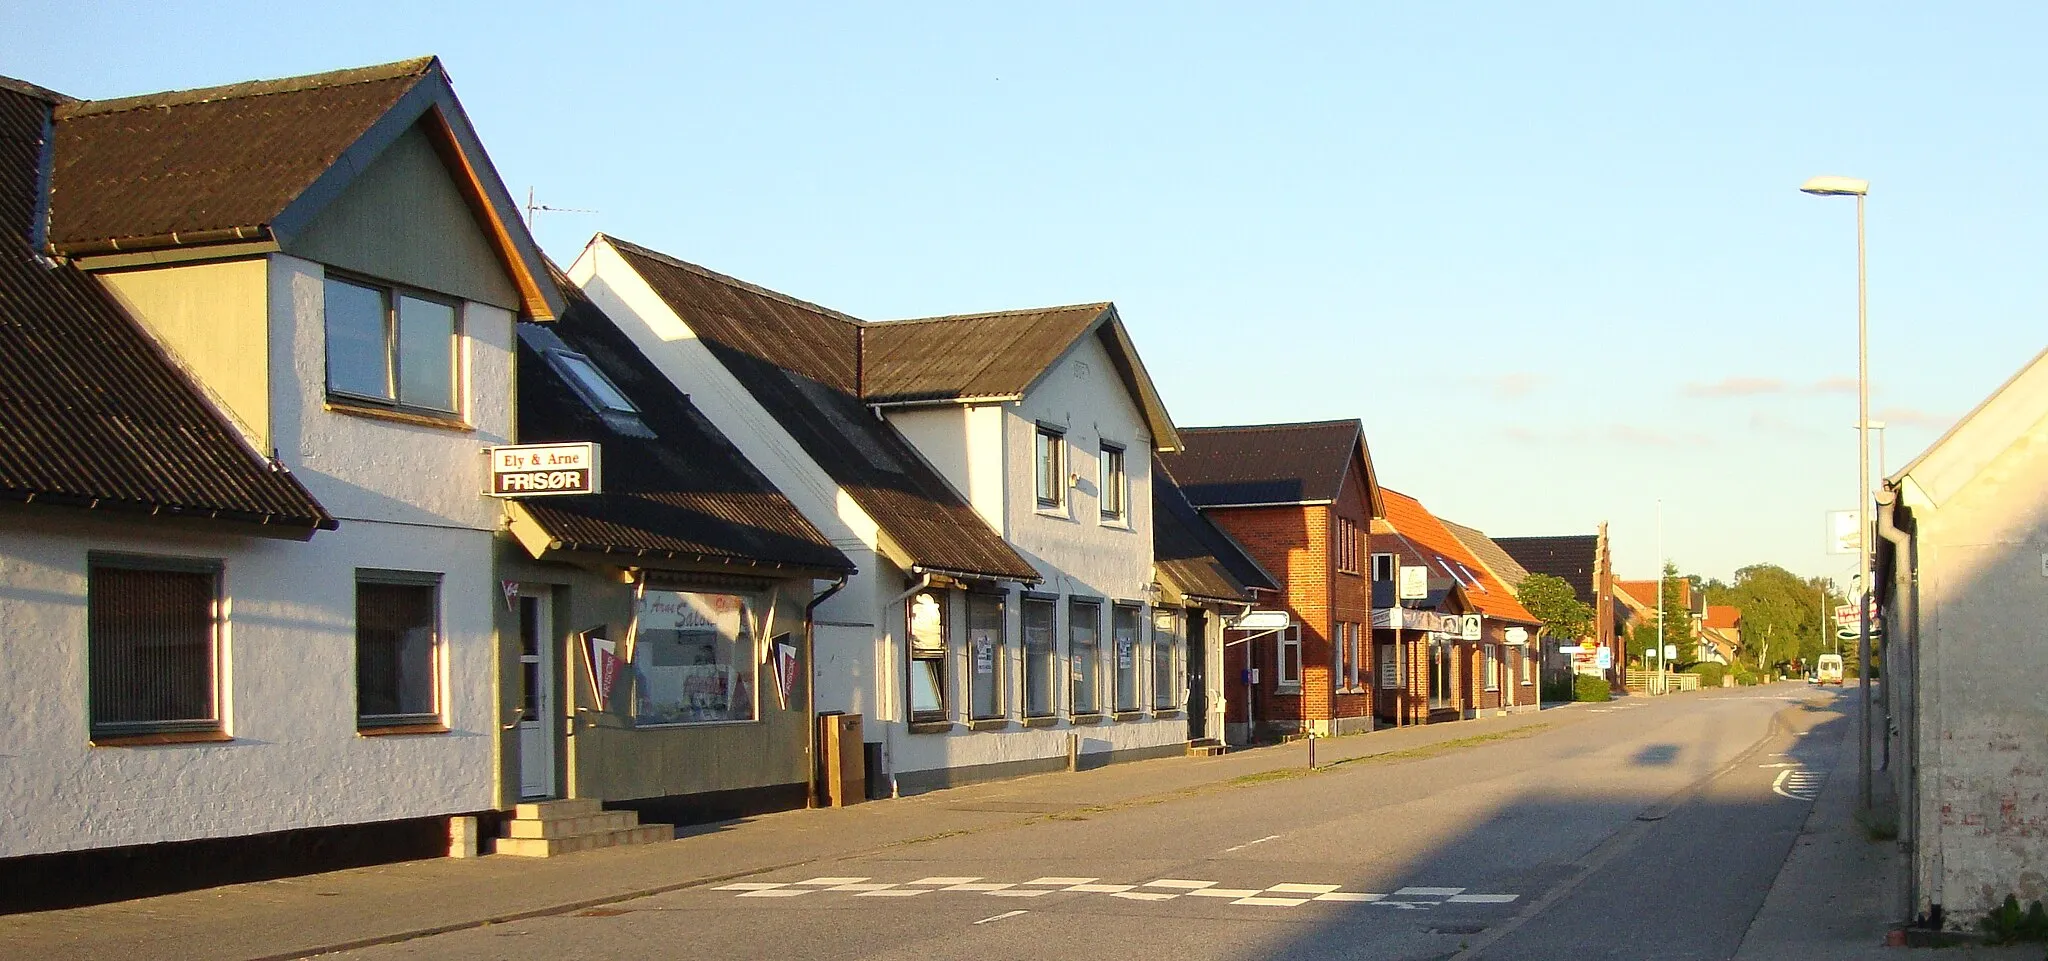 Photo showing: Luneborgs vej(Luneborgs road) in Tylstrup town in Nordjylland, Denmark.